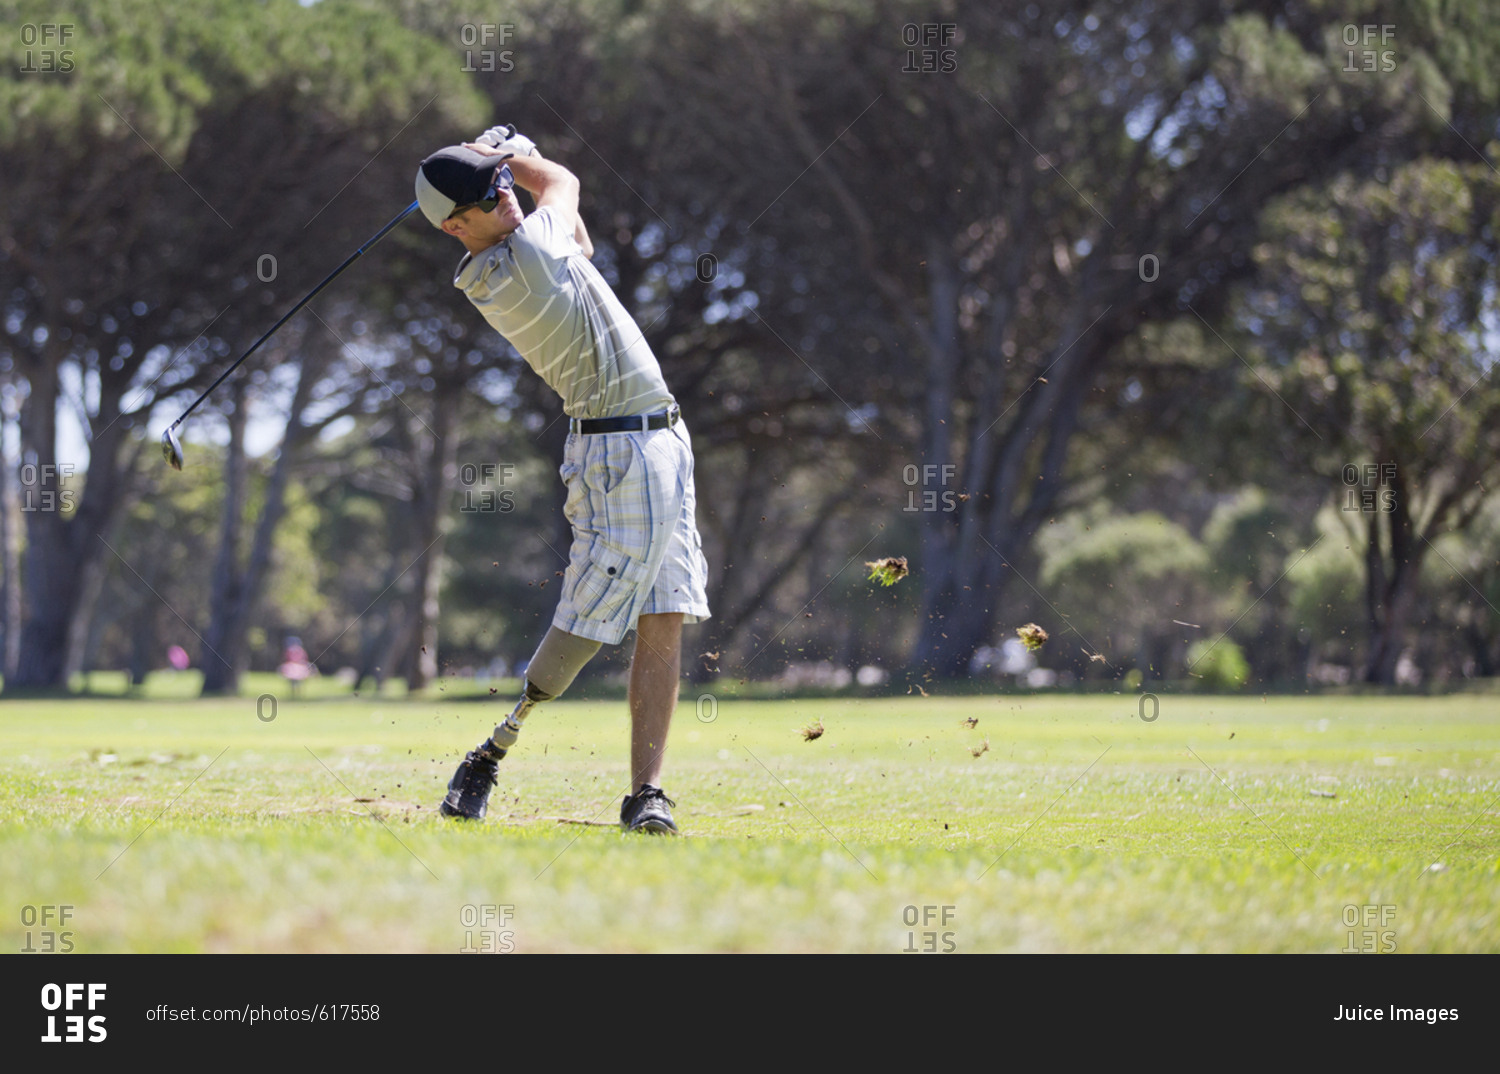 Male Golfer With Artificial Leg Teeing Off On Golf Course